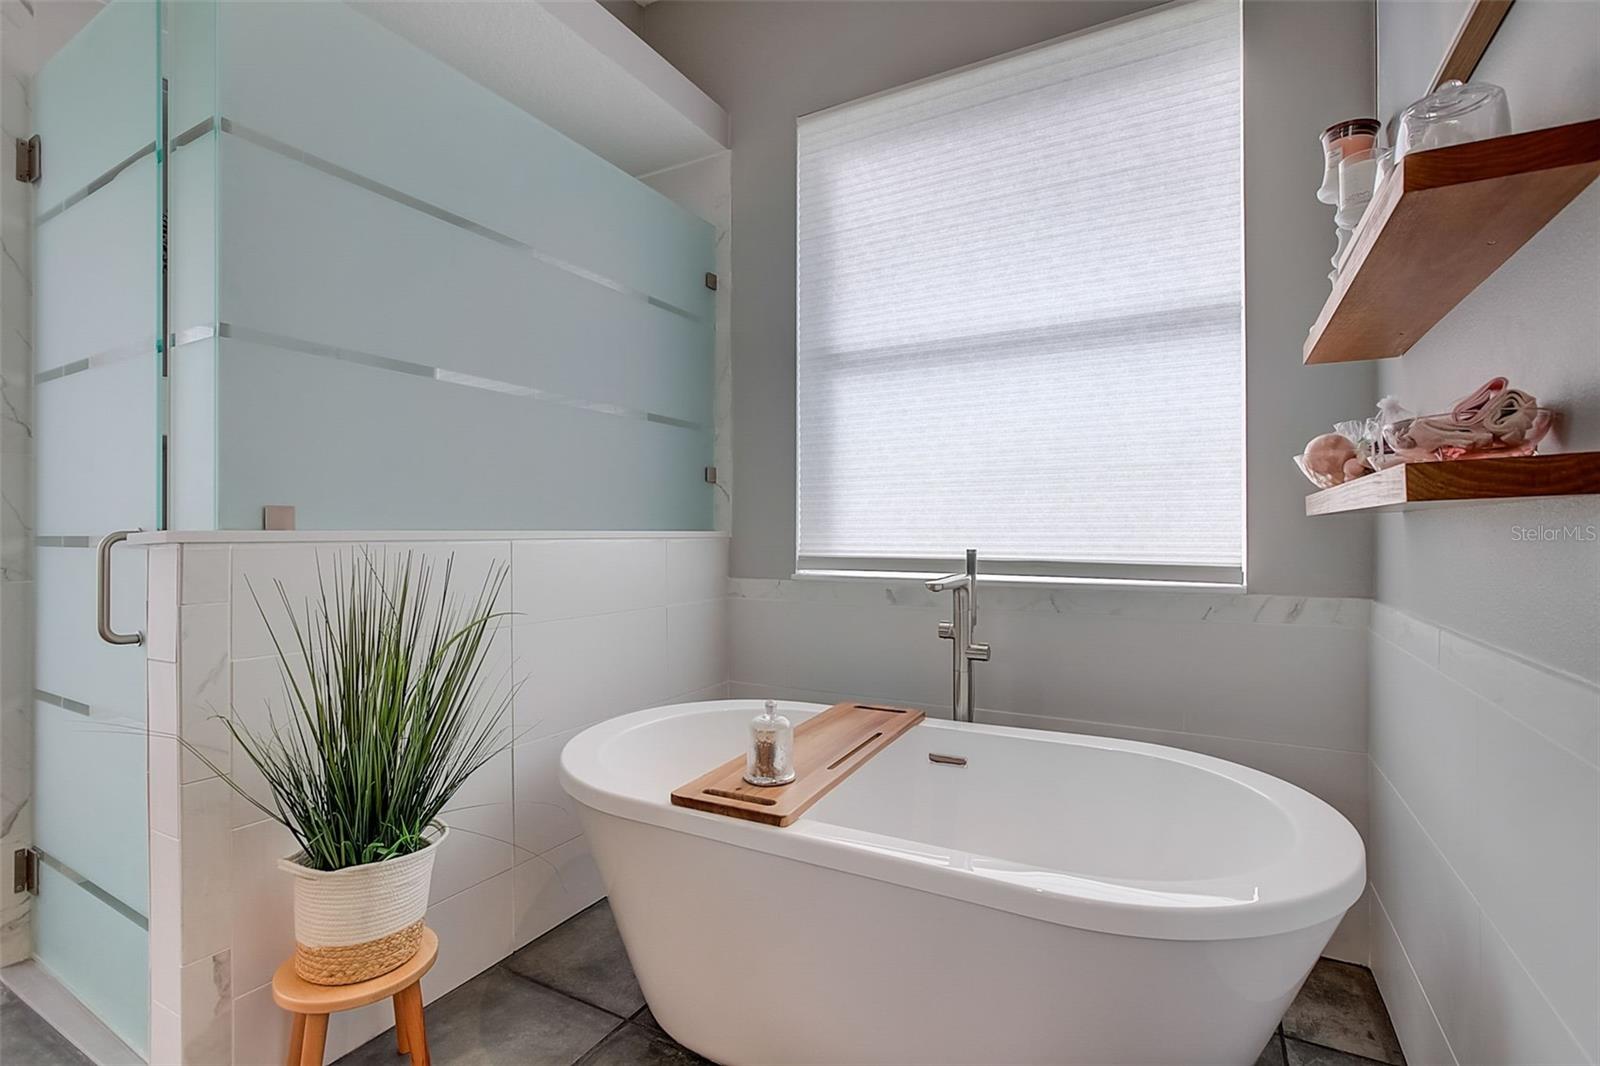 Relax and unwind in this soaking bathtub